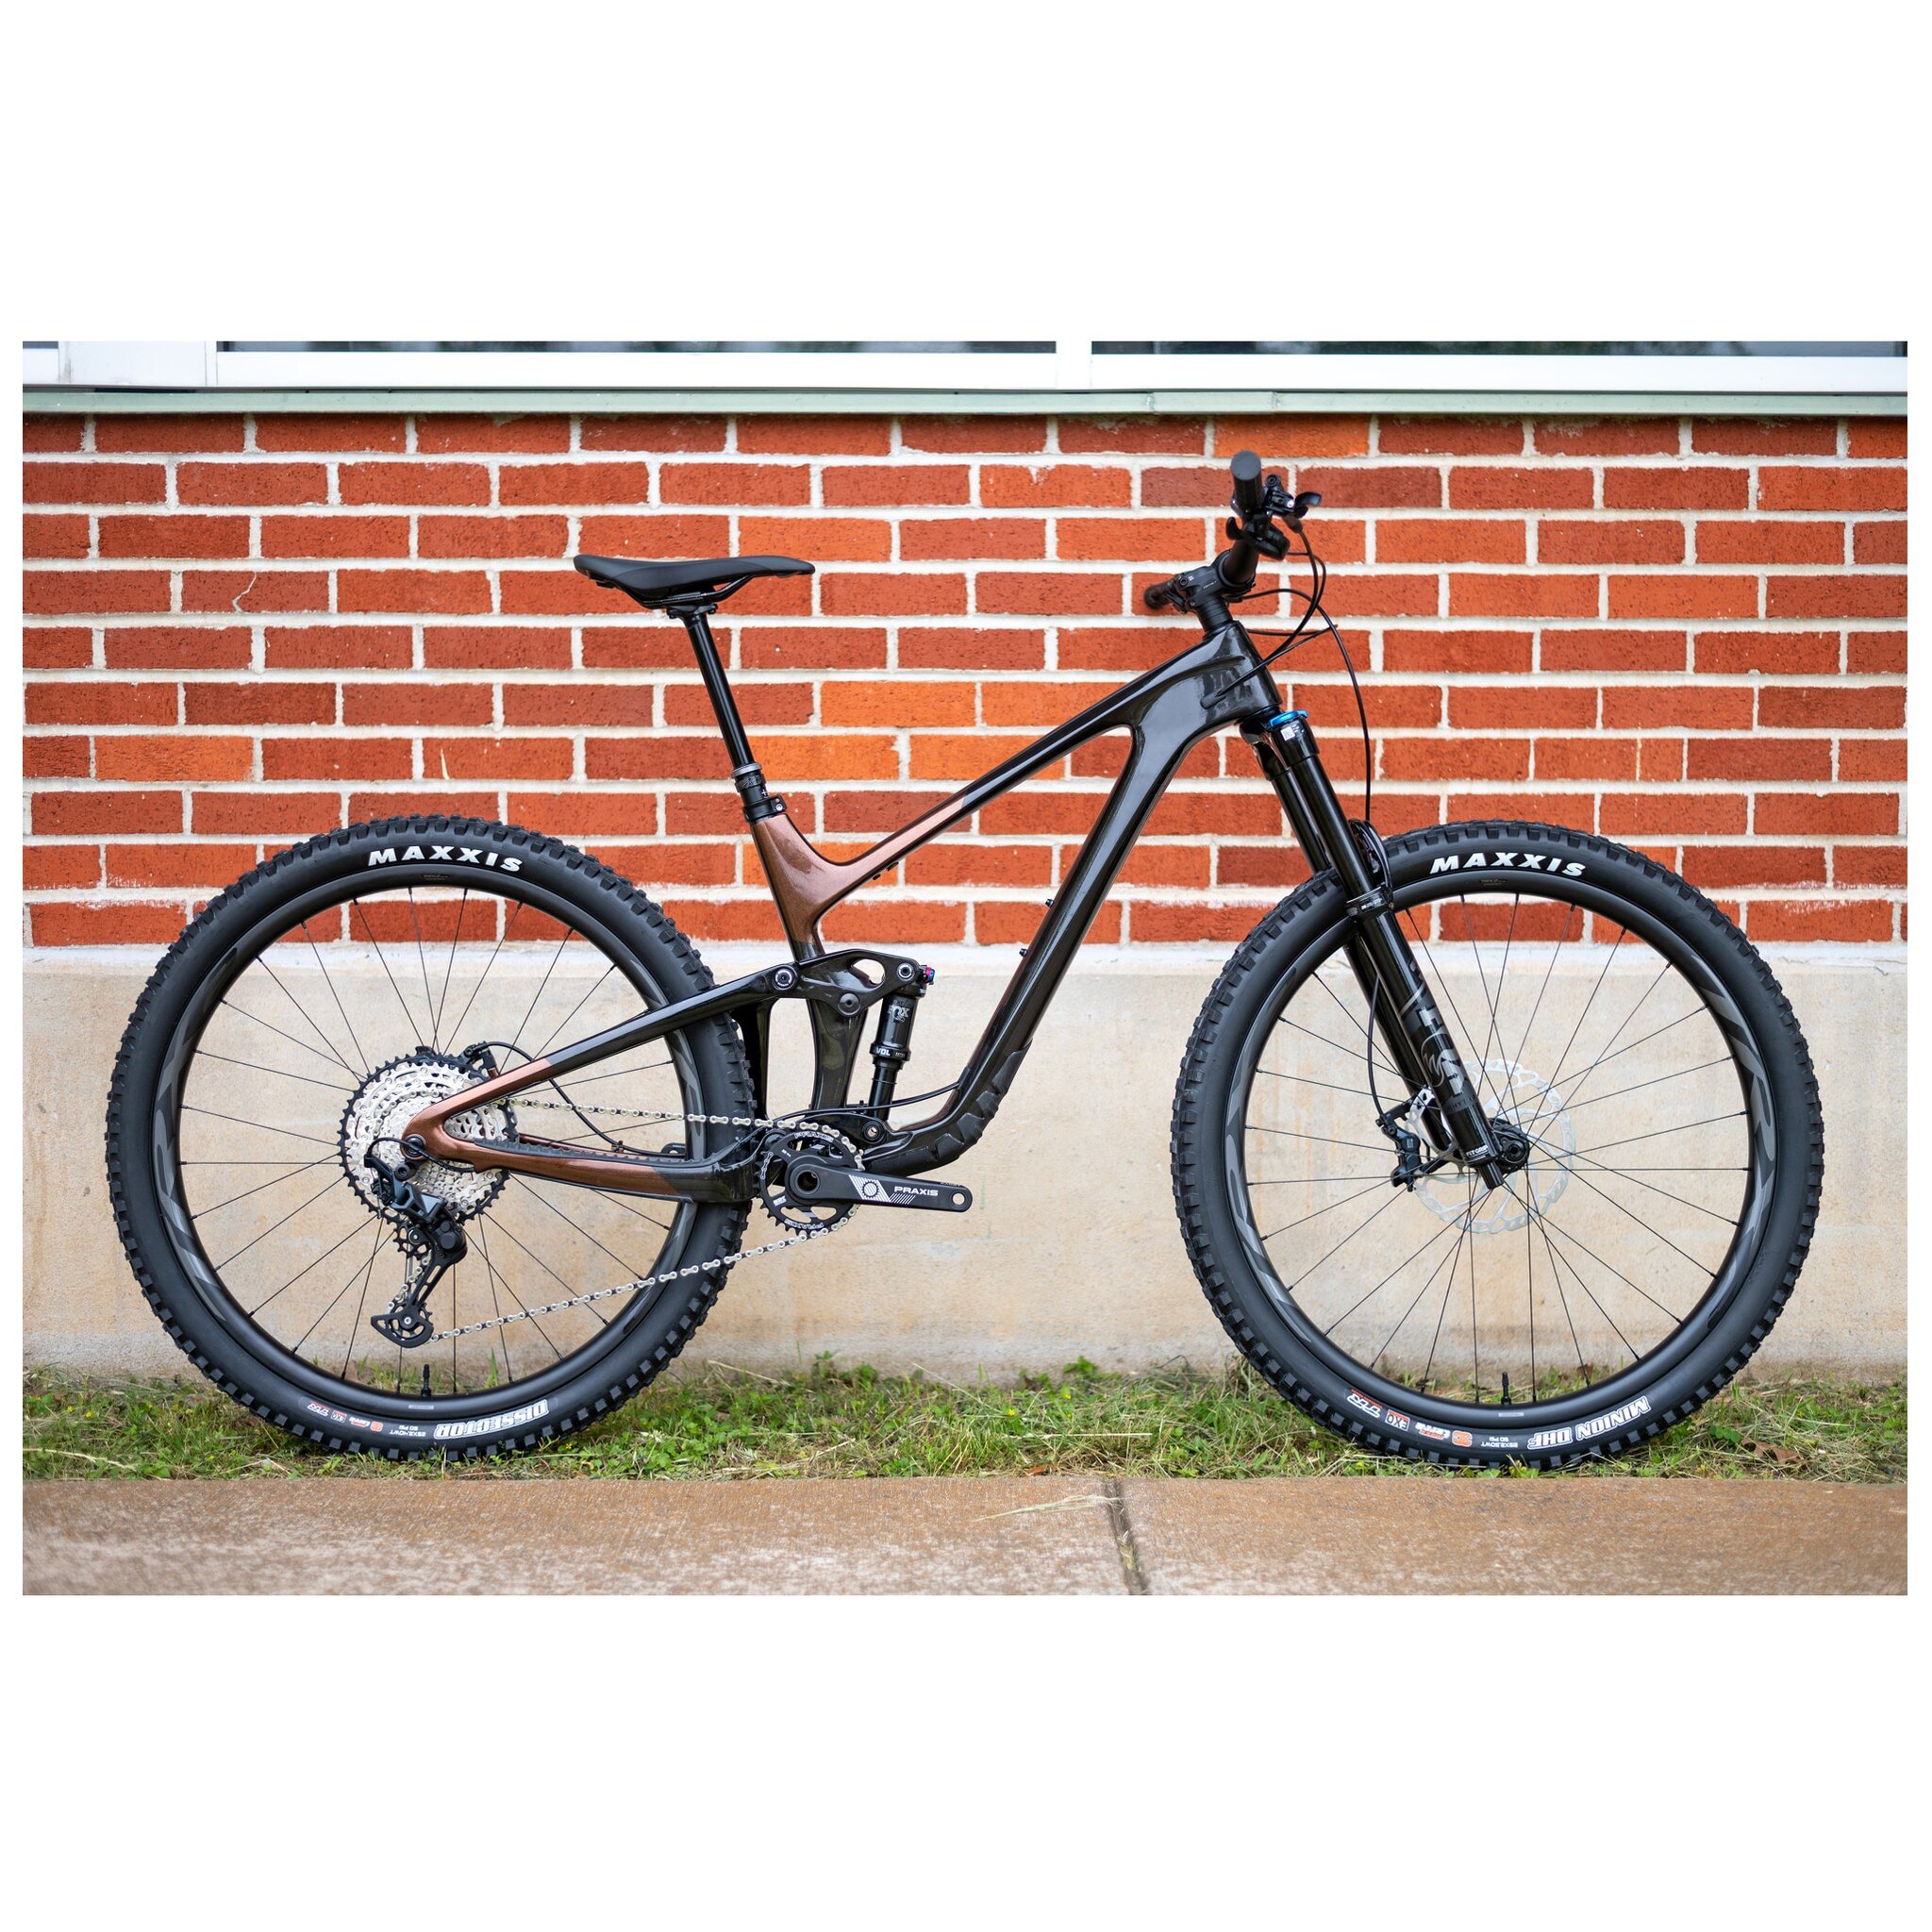 With 135mm rear/150mm front suspension, the carbon Trance X Advanced Pro is perfect for the trails of @spidermountaintx. These are available now, and discounted $700 for a limited time. 
#bicyclehouseatx #ridegiant #shoplocal